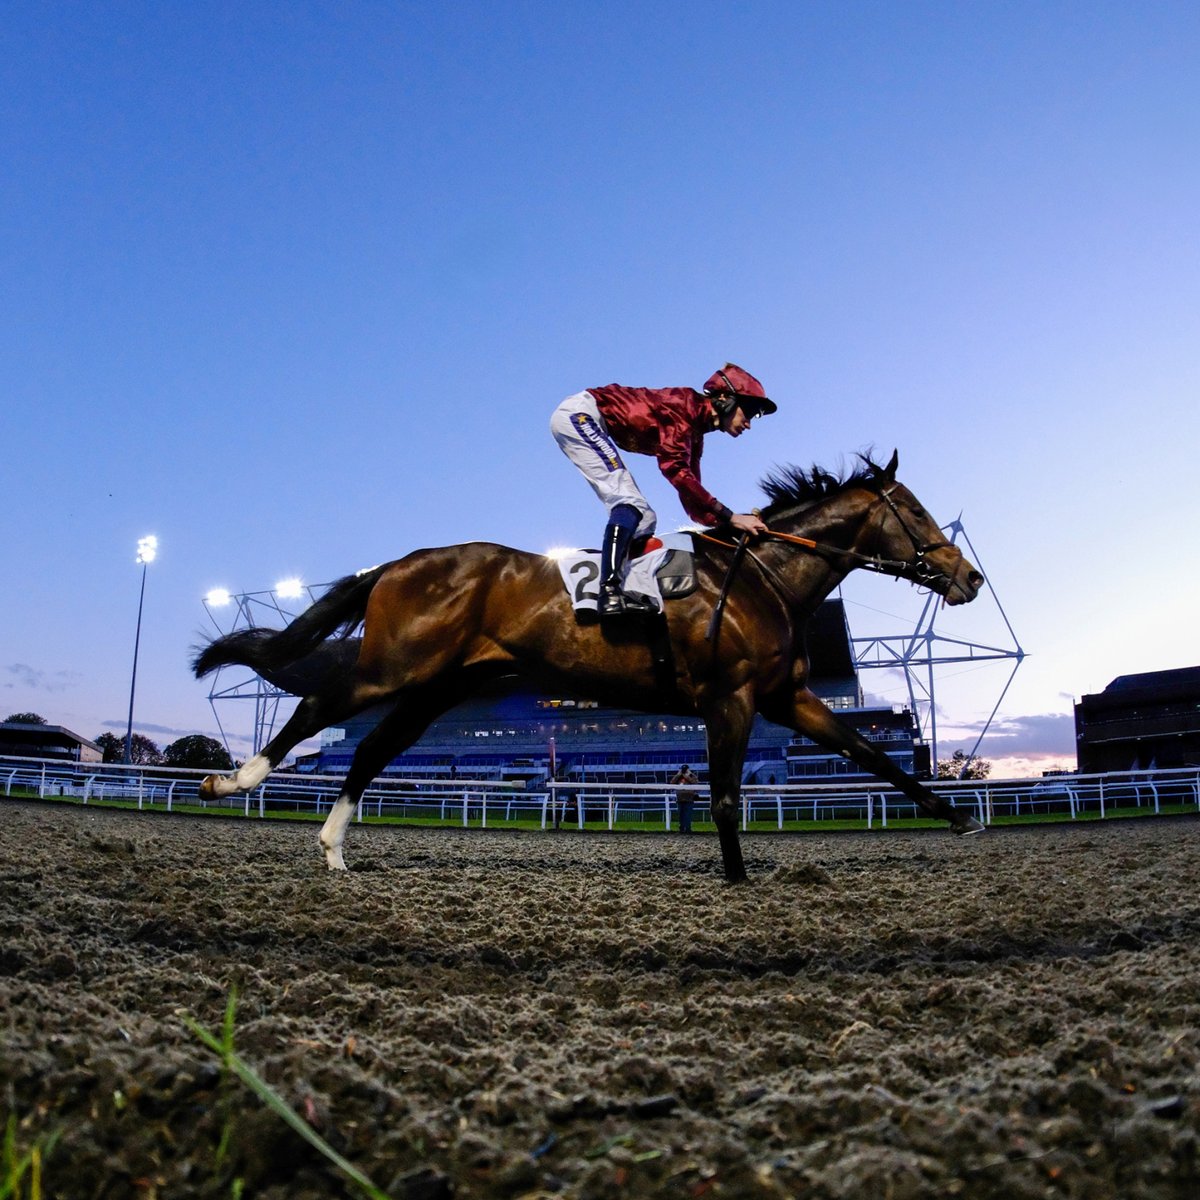 After a week off, we're back racing on Wednesday!🥳🏇 There's still plenty of time to book your tickets or even treat yourself to a night in our Panoramic Restaurant🍴 Head to our website to book: thejockeyclub.co.uk/kempton/